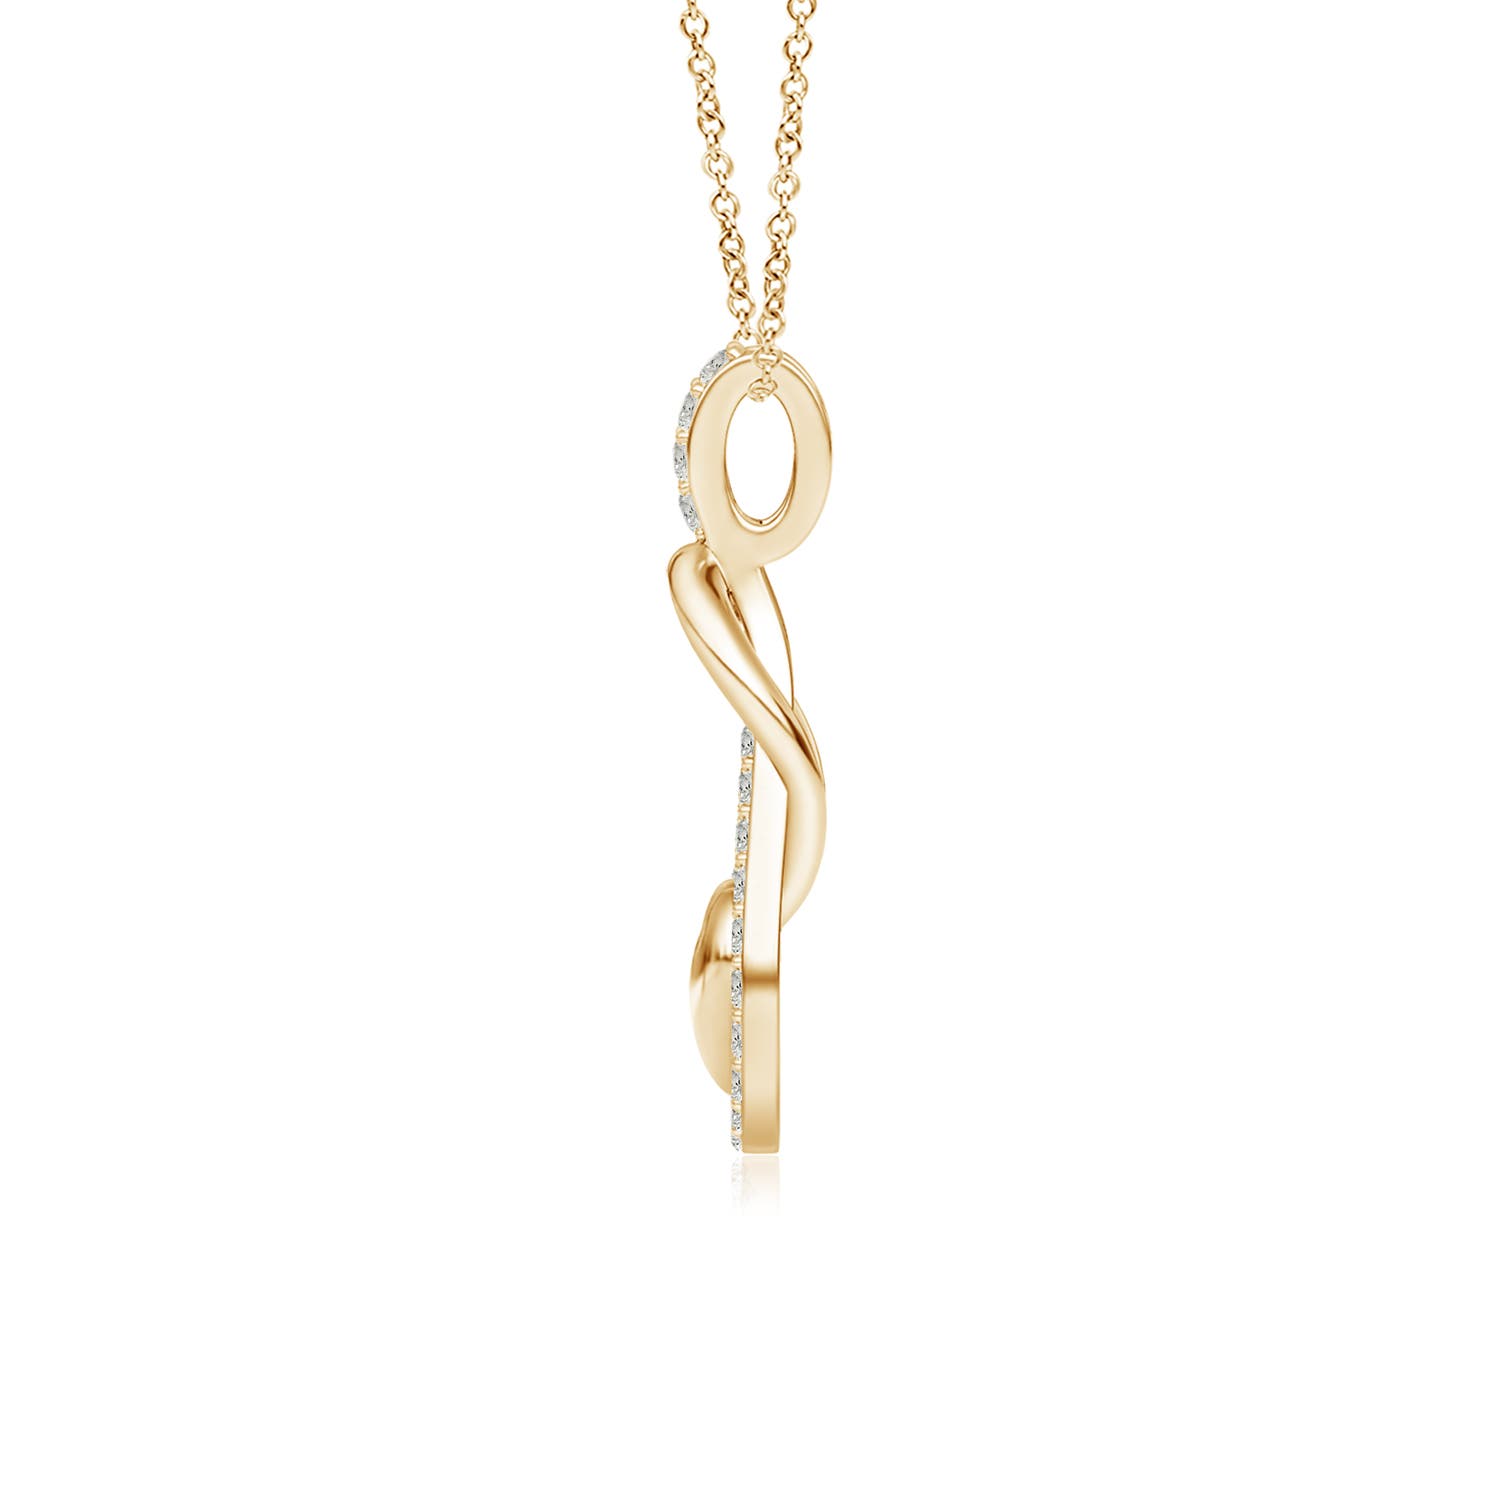 K, I3 / 0.32 CT / 18 KT Yellow Gold